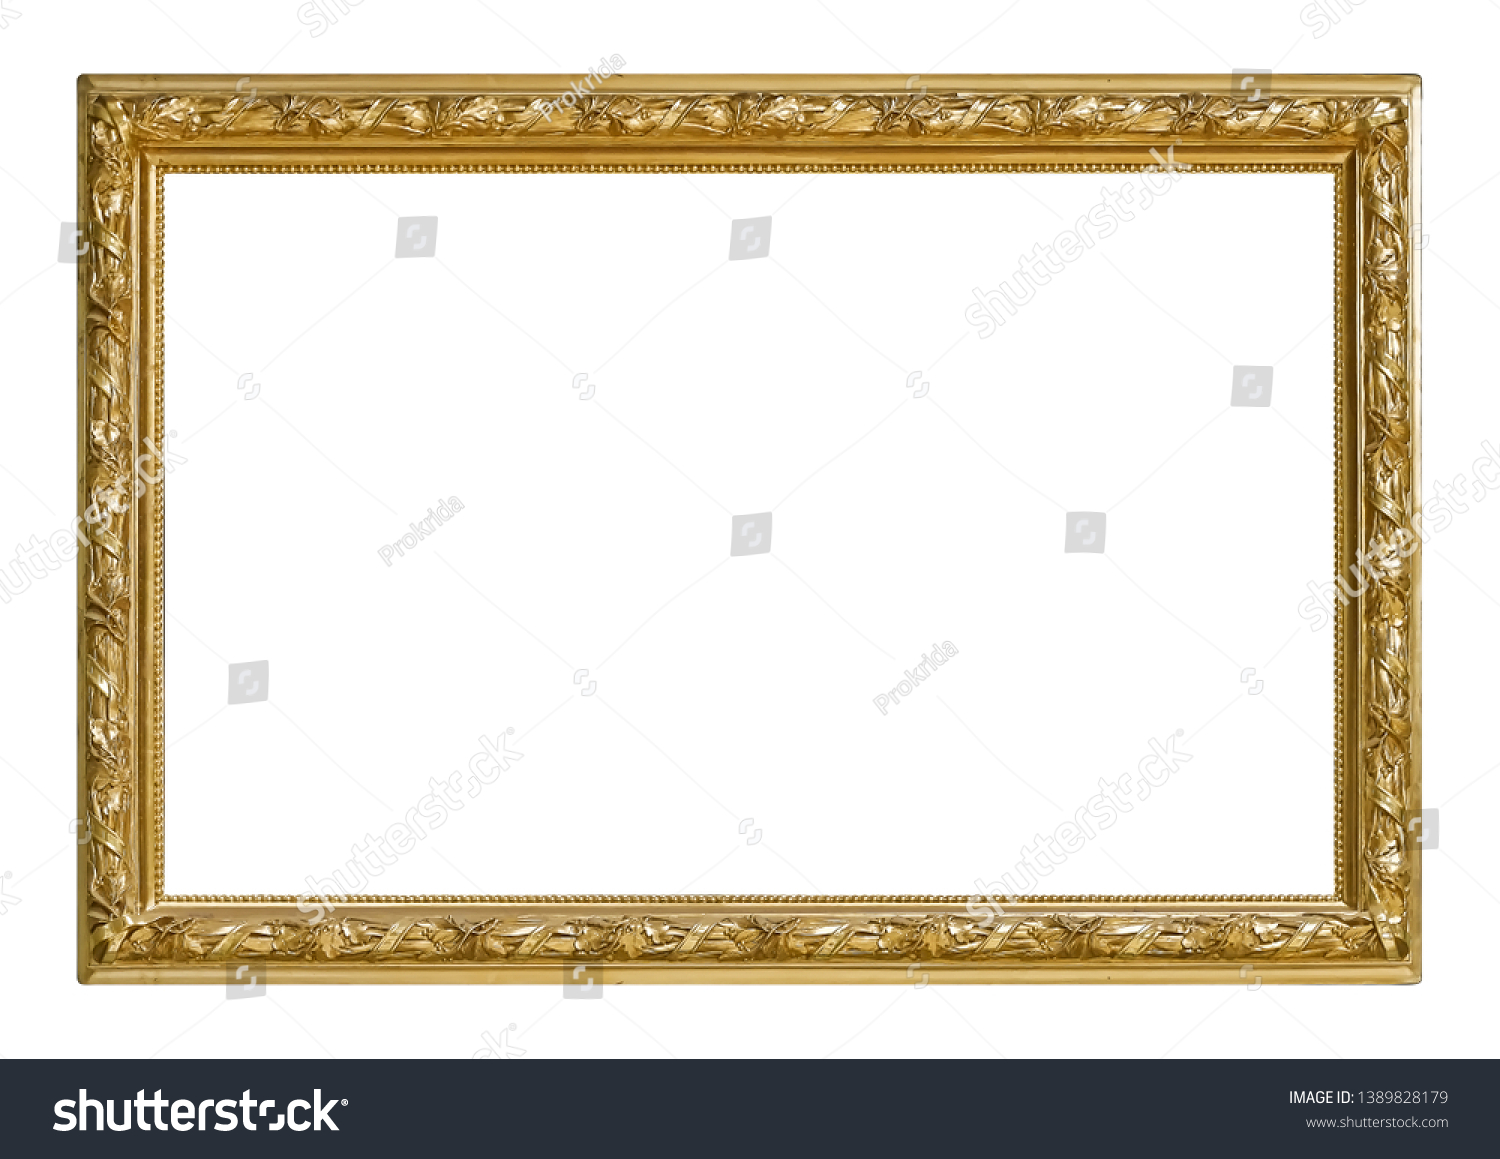 Golden frame for paintings, mirrors or photo isolated on white background. Design element with clipping path #1389828179